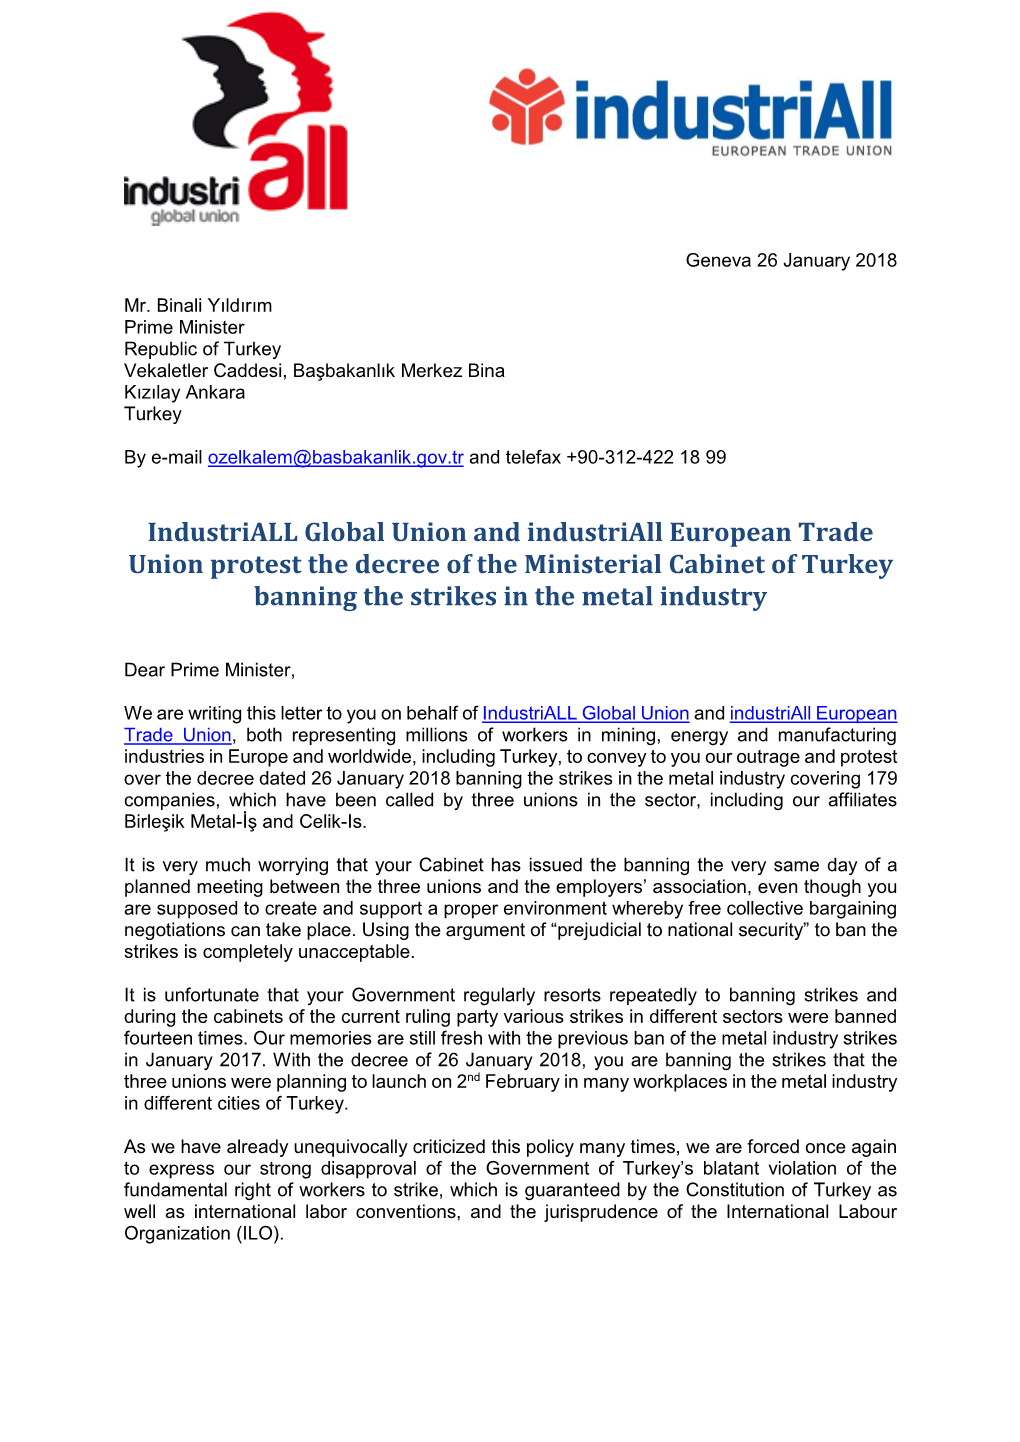 Industriall Global Union and Industriall European Trade Union Protest the Decree of the Ministerial Cabinet of Turkey Banning the Strikes in the Metal Industry